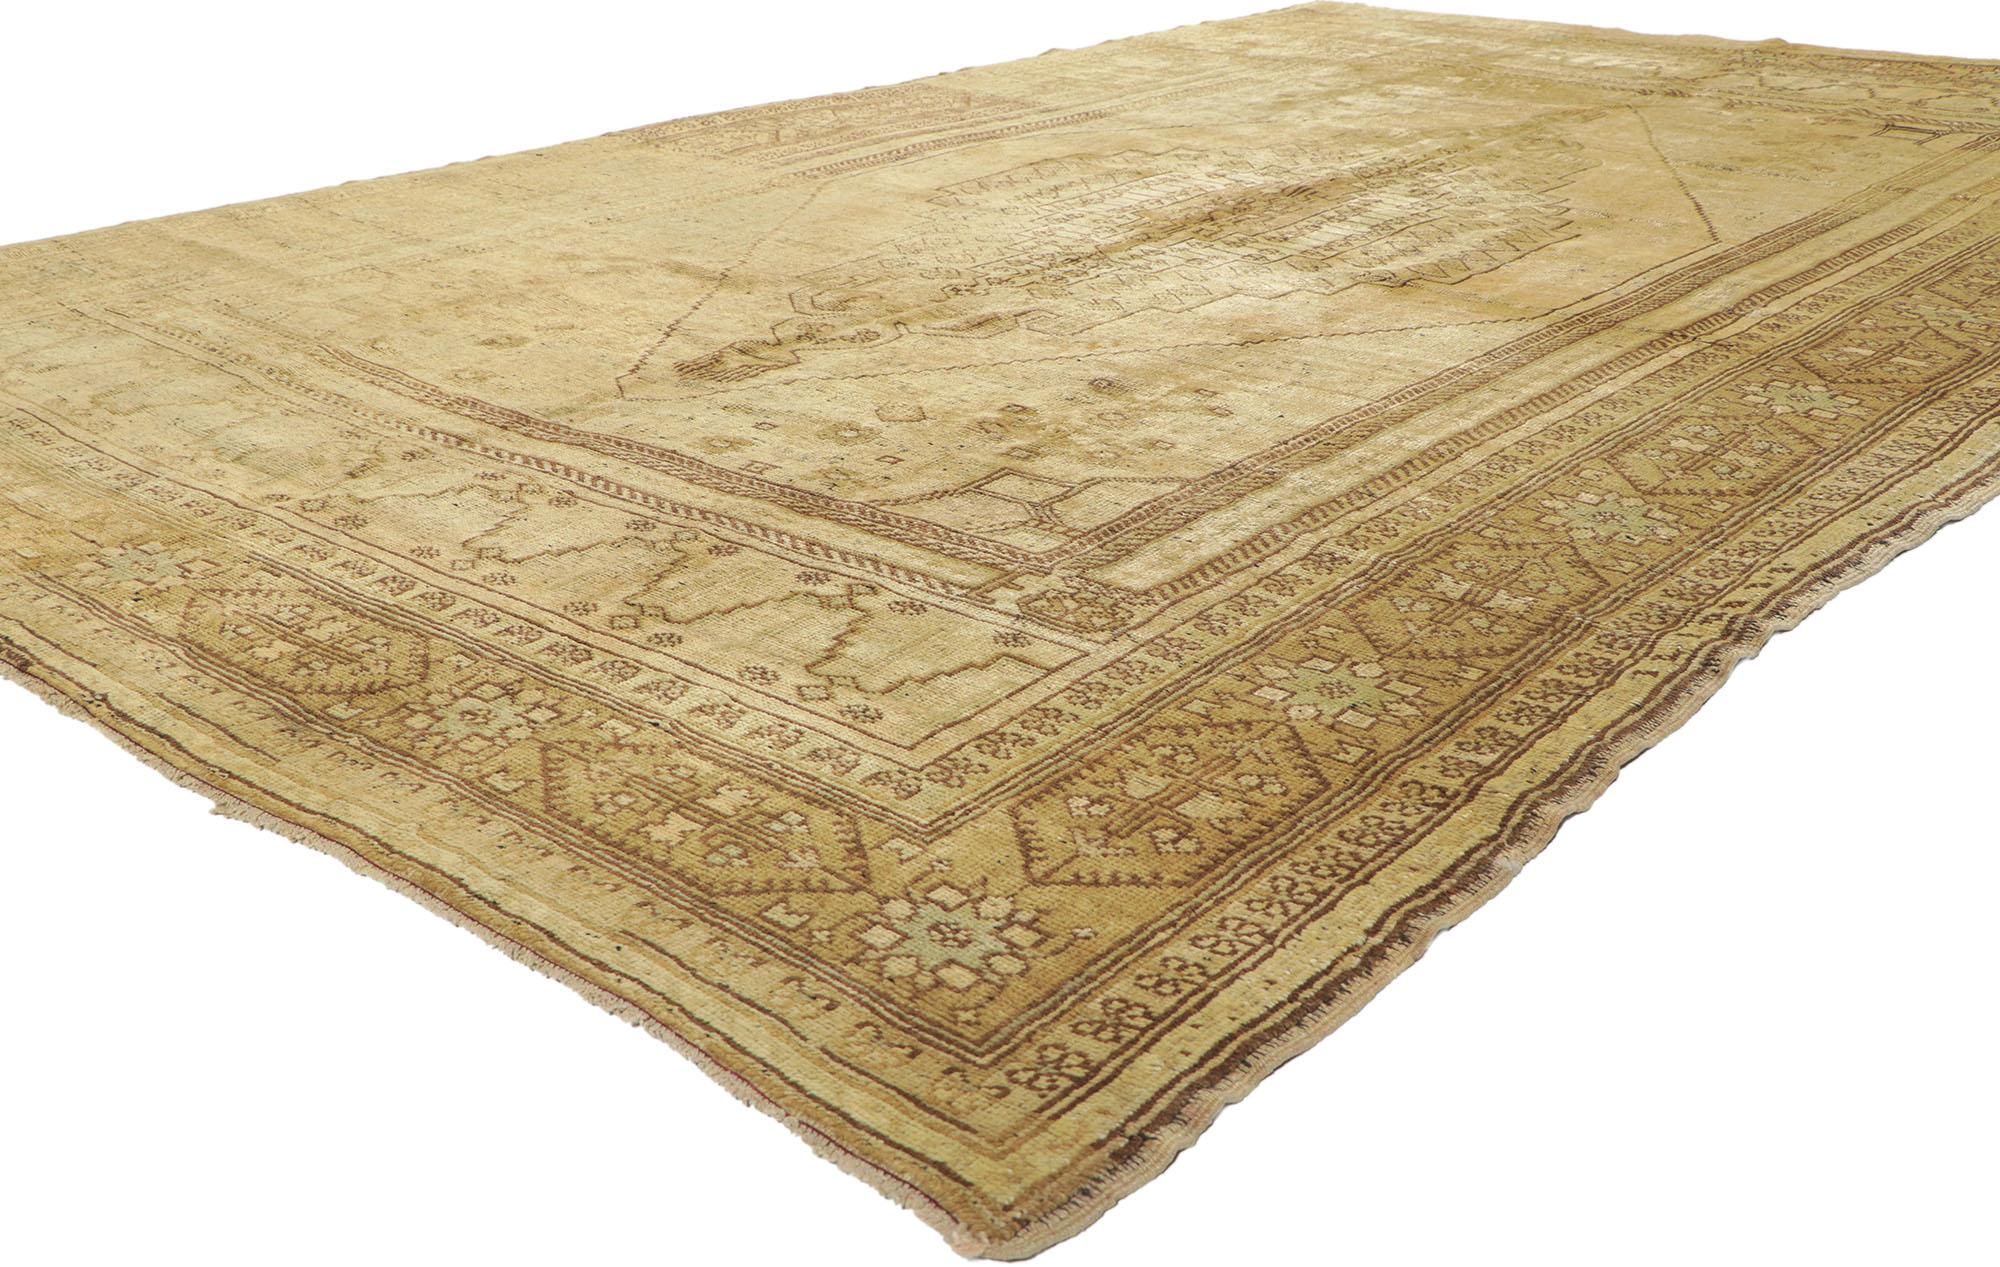 50503, vintage Turkish Oushak rug with Warm Earth-Tone Colors. This hand knotted wool vintage Turkish Oushak rug features a cusped lozenge medallion with comb pendants at either end floating in a hexagonal stepped cut-out field. Each corner spandrel